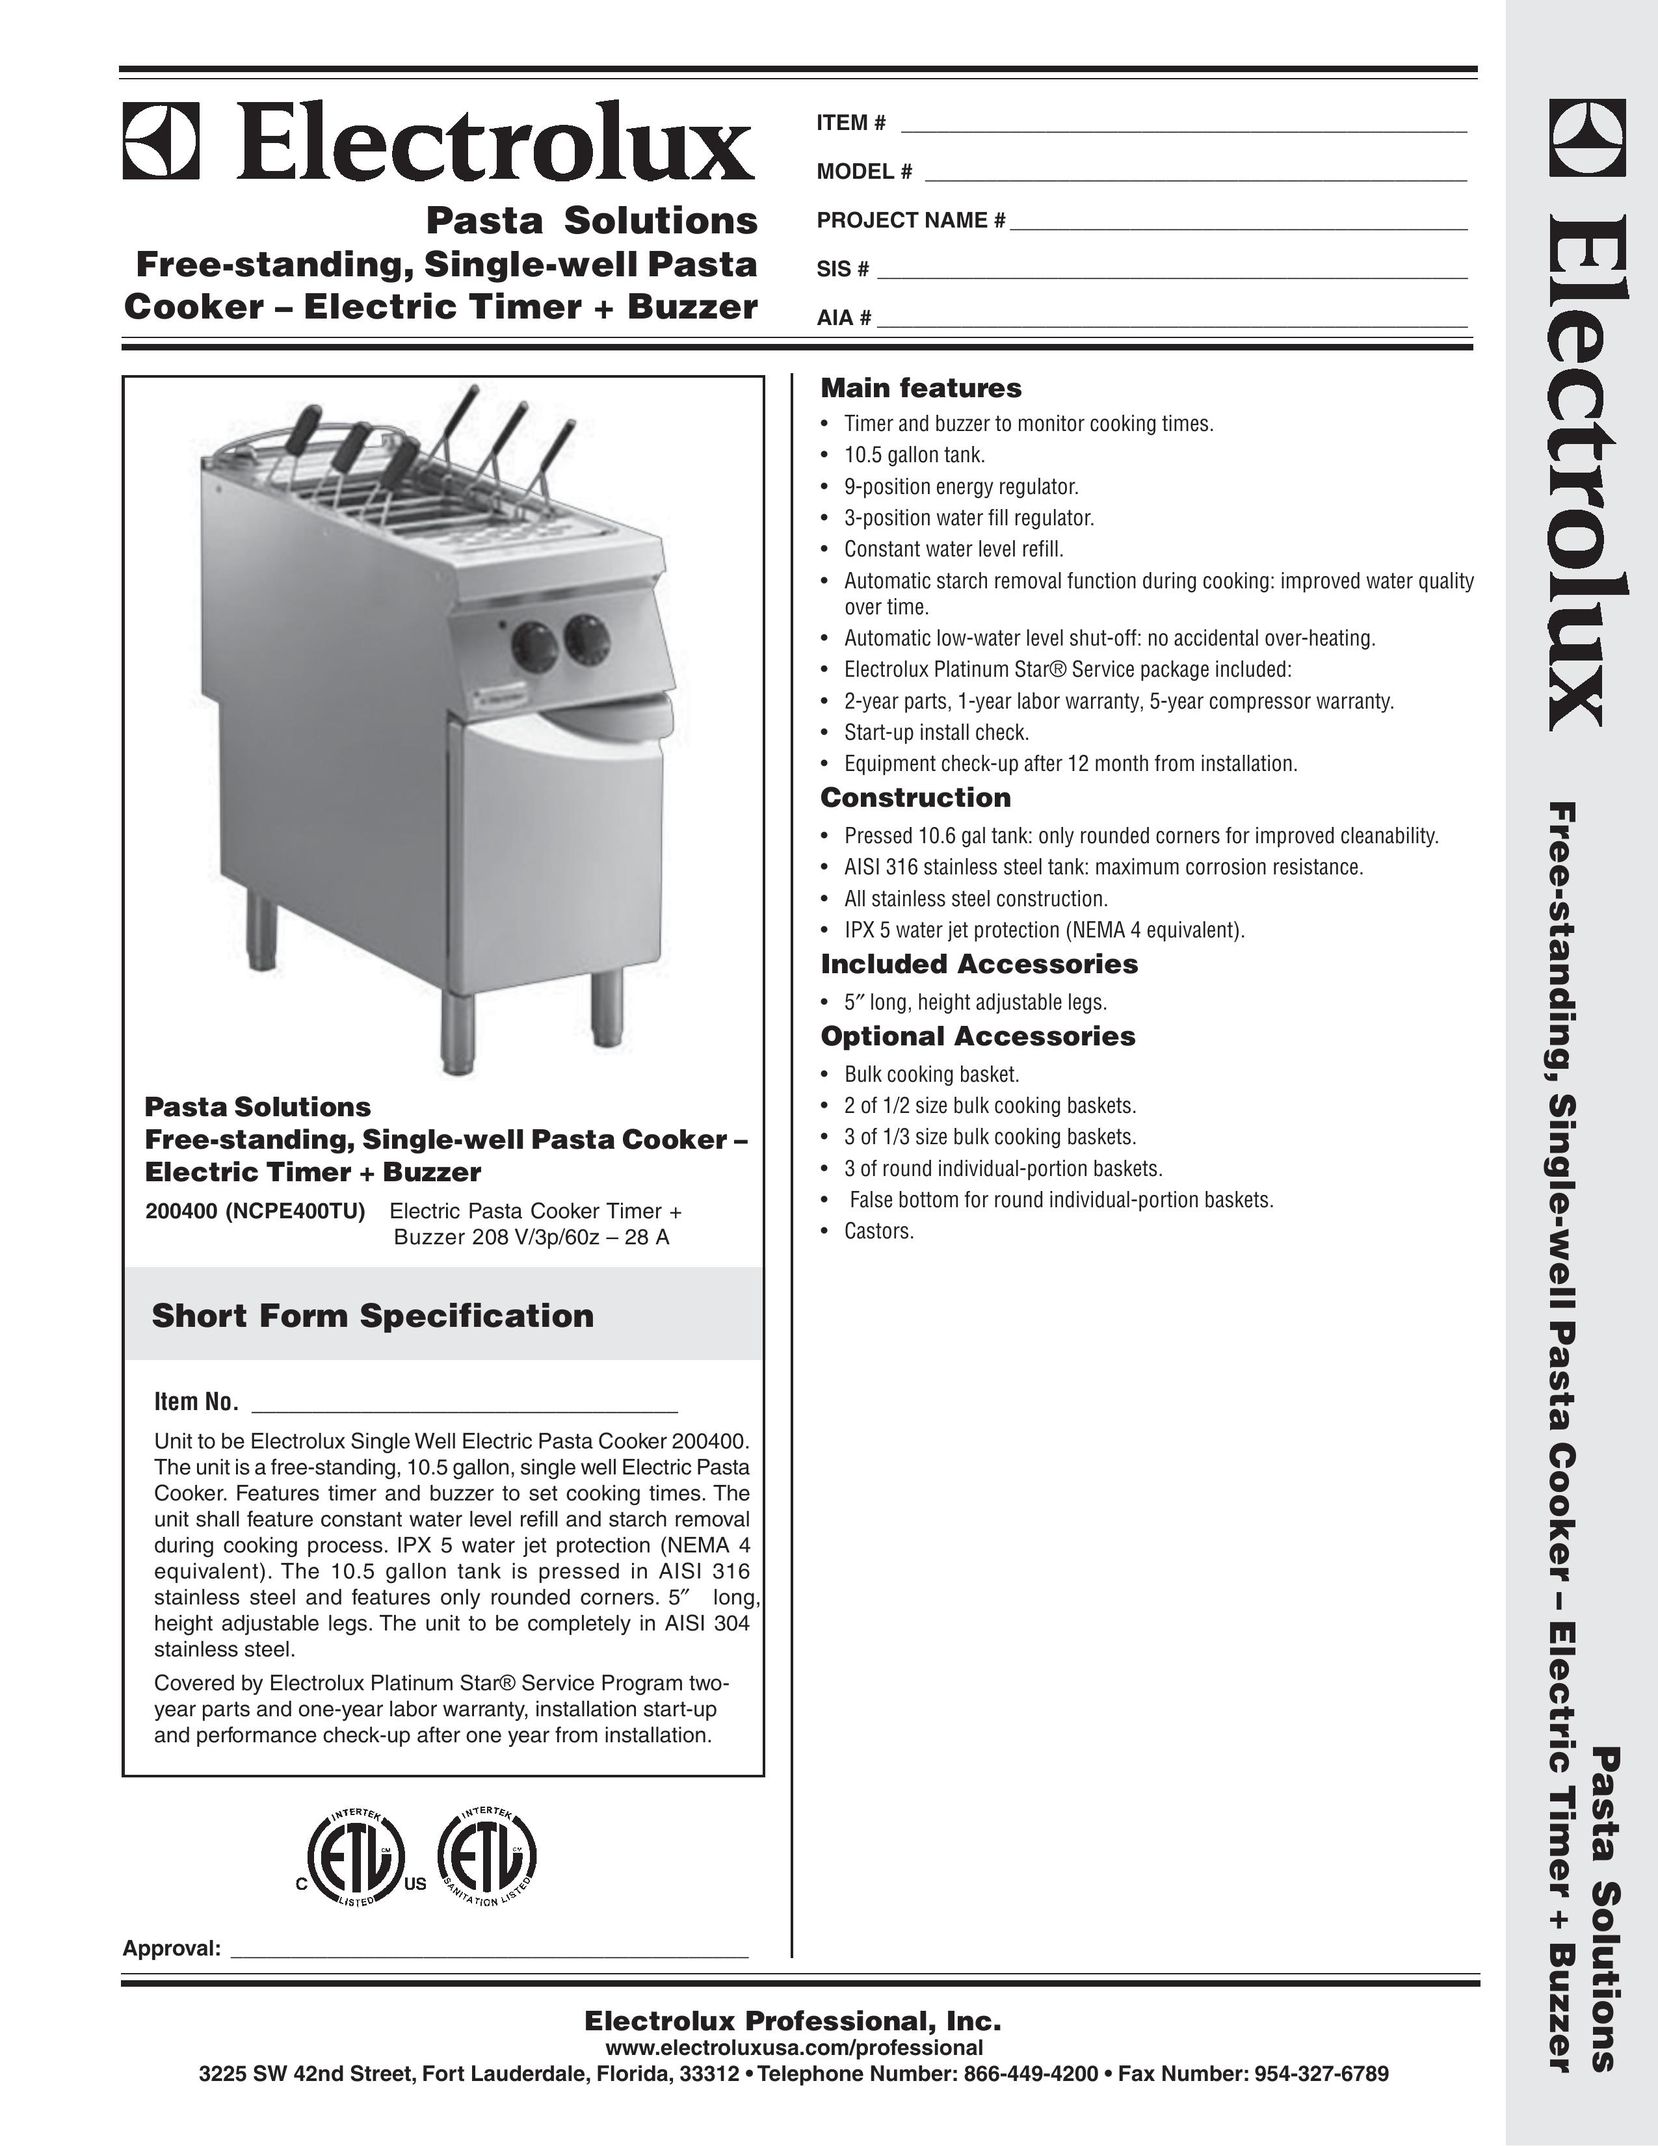 Electrolux Single-well Pasta Cooker Pasta Maker User Manual